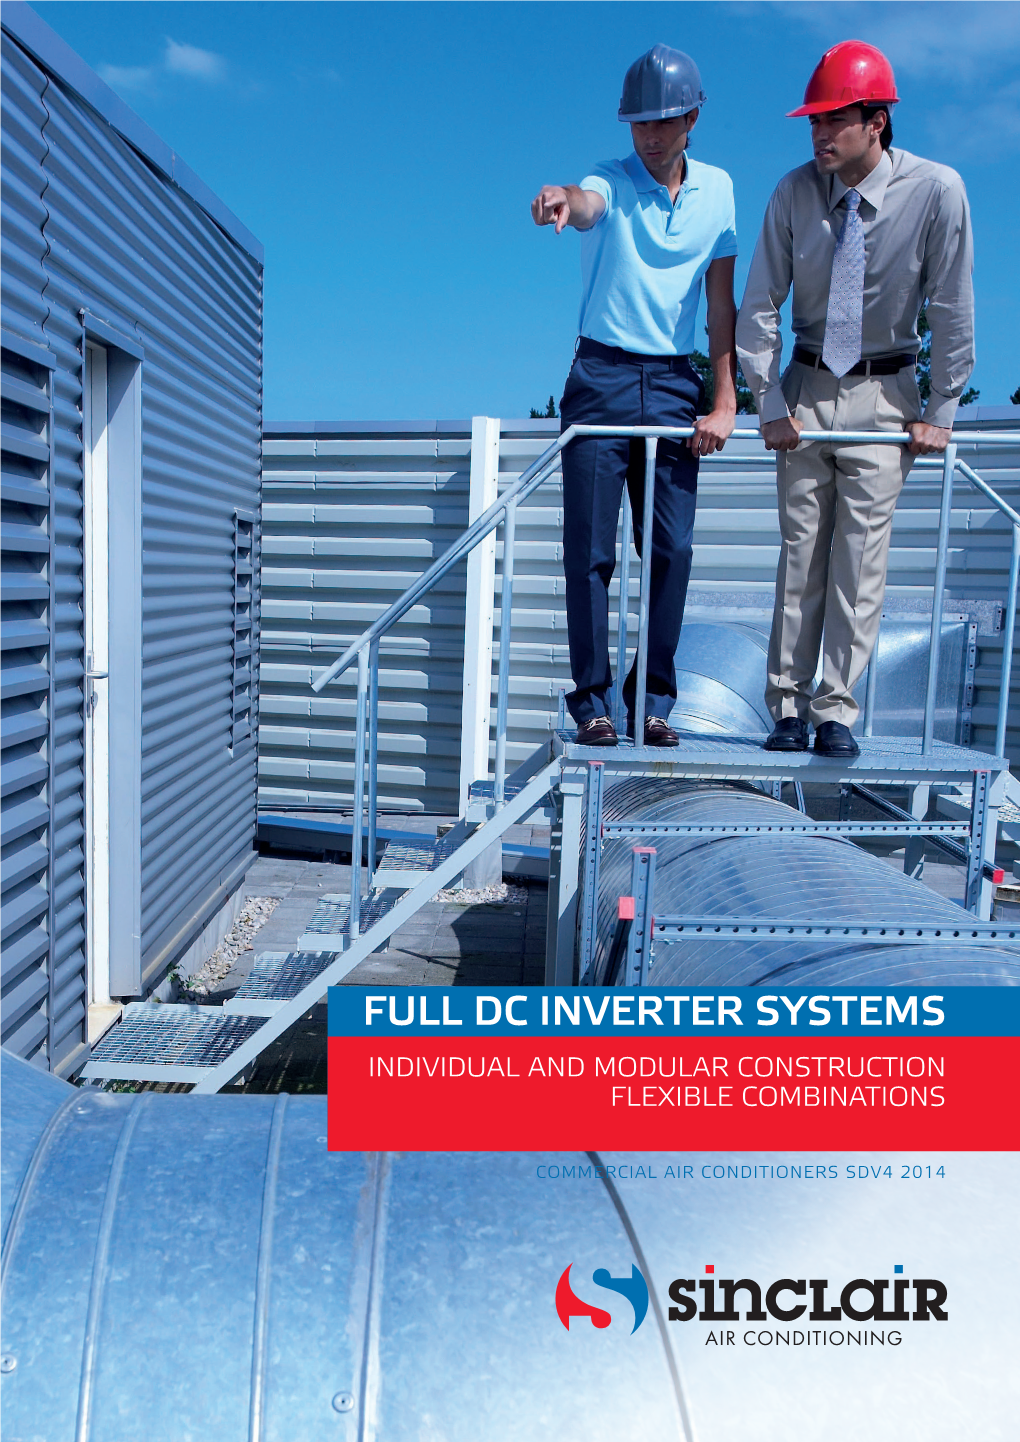 Full Dc Inverter Systems Individual and Modular Construction Flexible Combinations